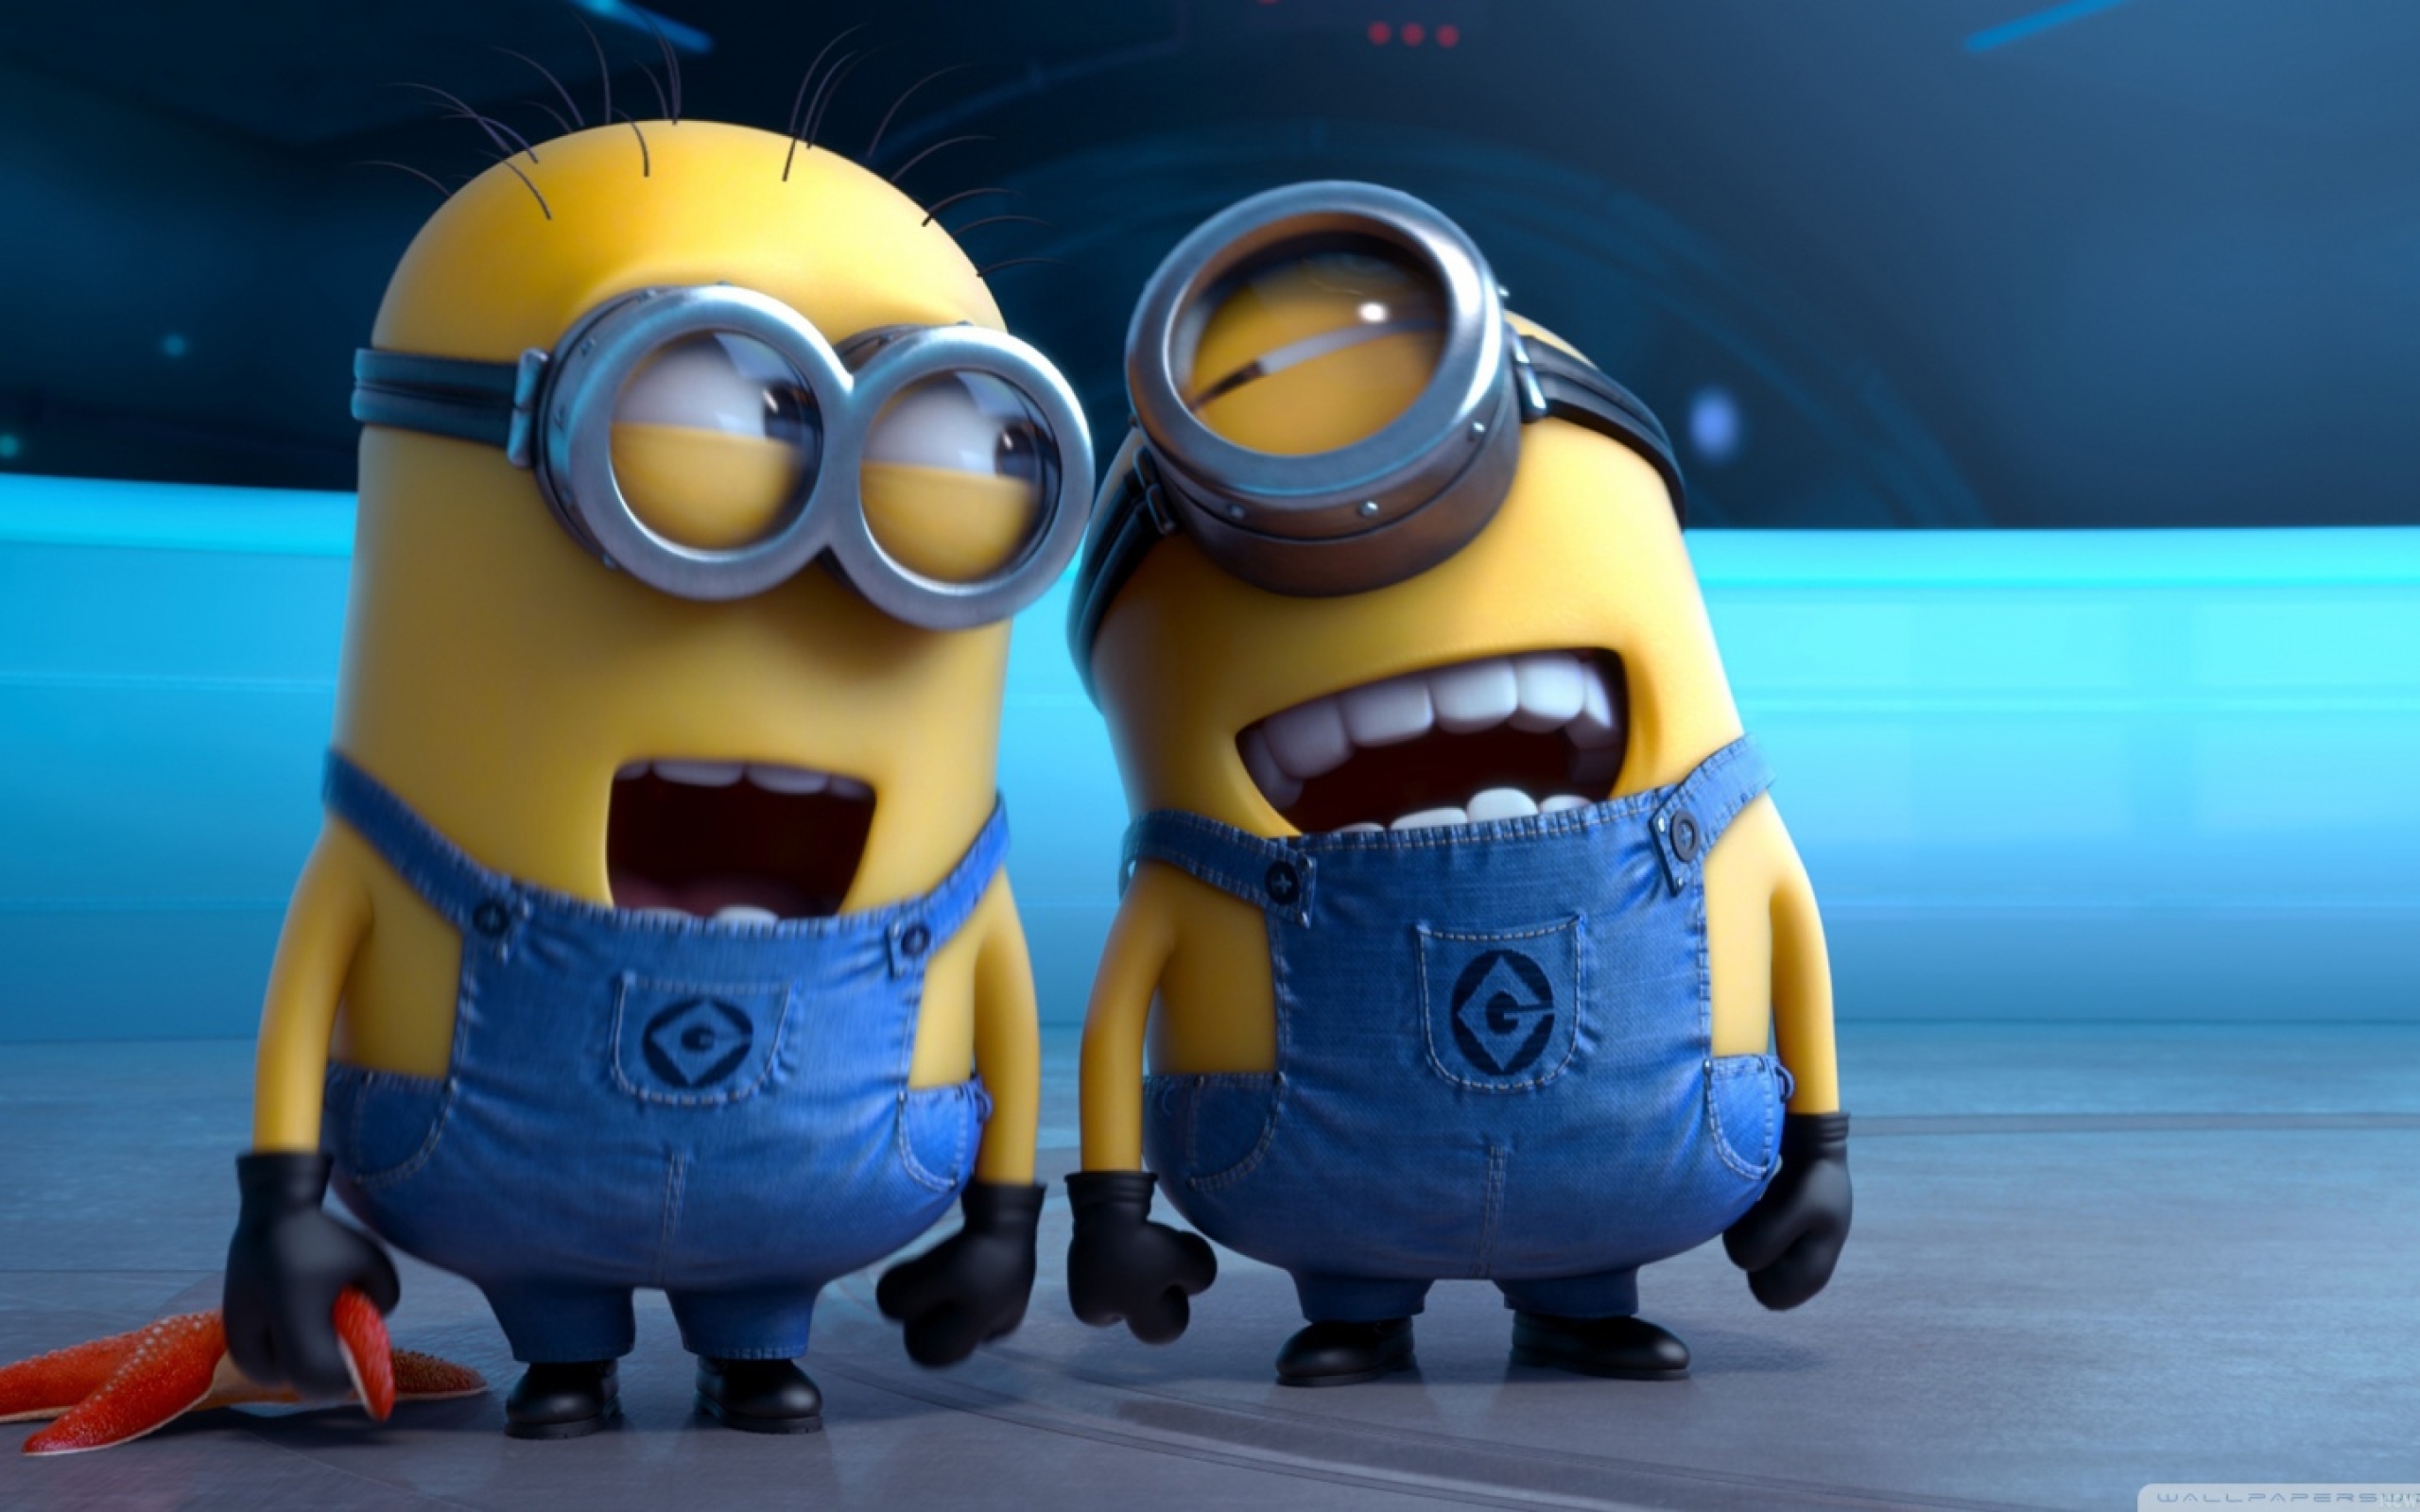 2560x1600 minion laugh wallpaper hd 2560x1600 resolution wallpaper hd movies 4k wallpapers images photos and background 2560x1600 minion laugh wallpaper hd